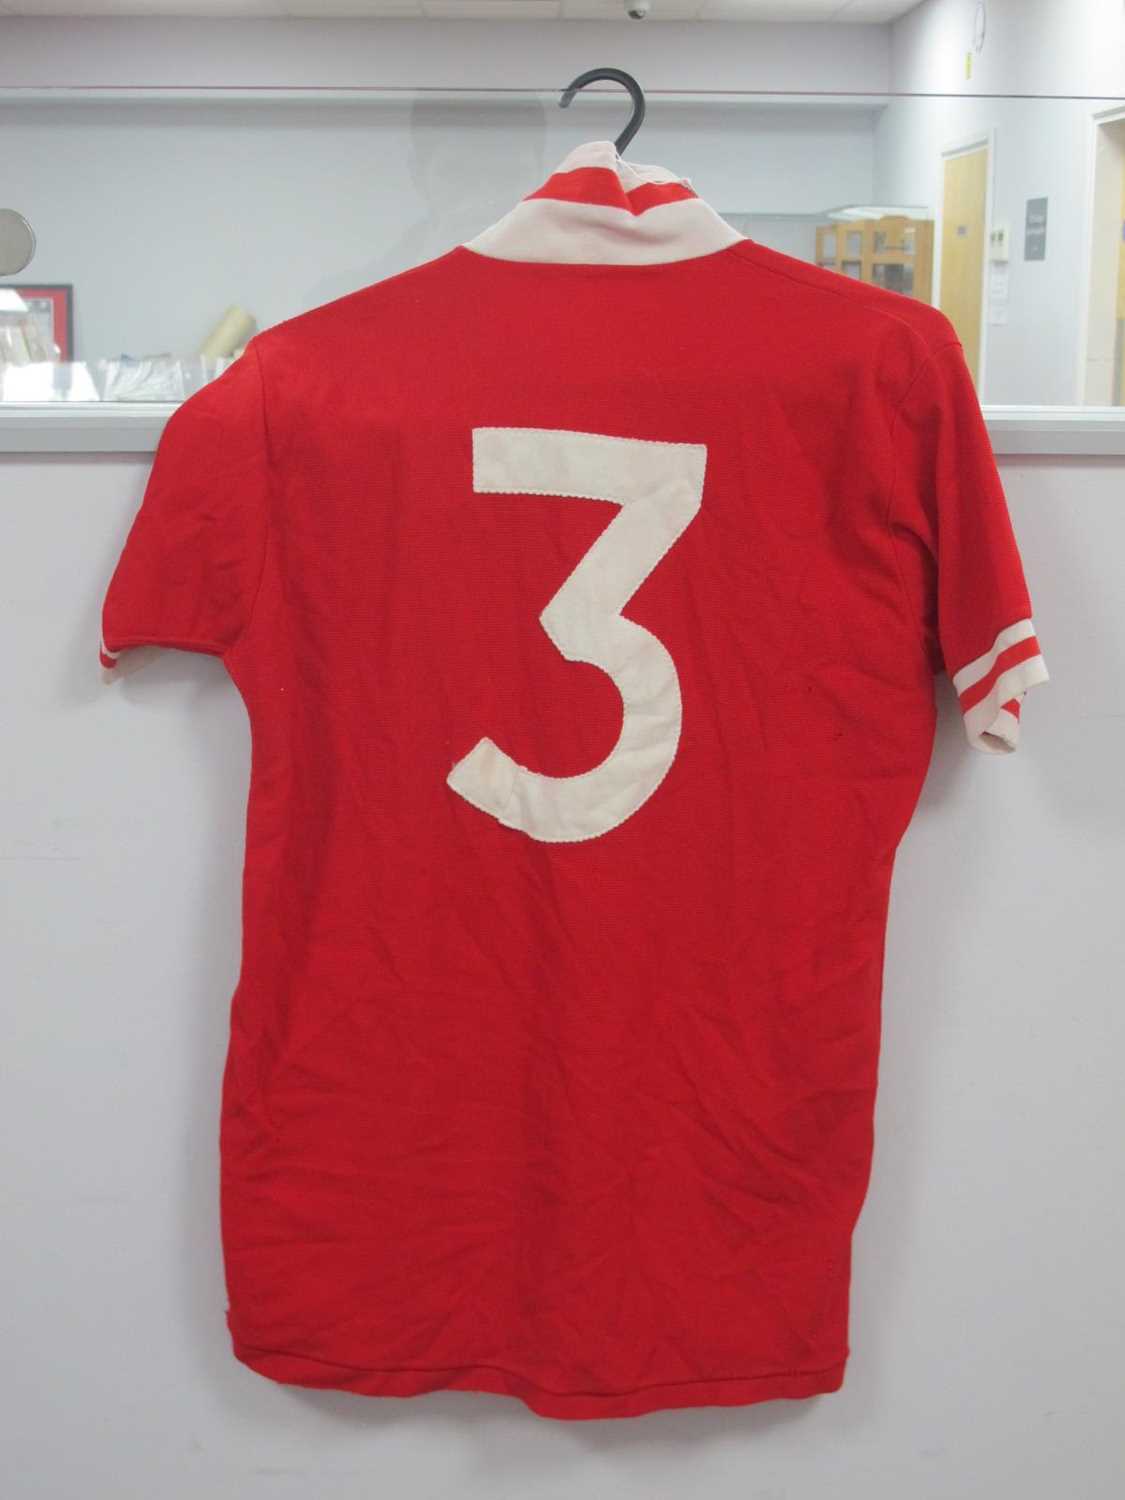 Leicester City Umbro Red Away Shirt, with striped collar and fox in shield badge, Number 3 to - Image 5 of 6